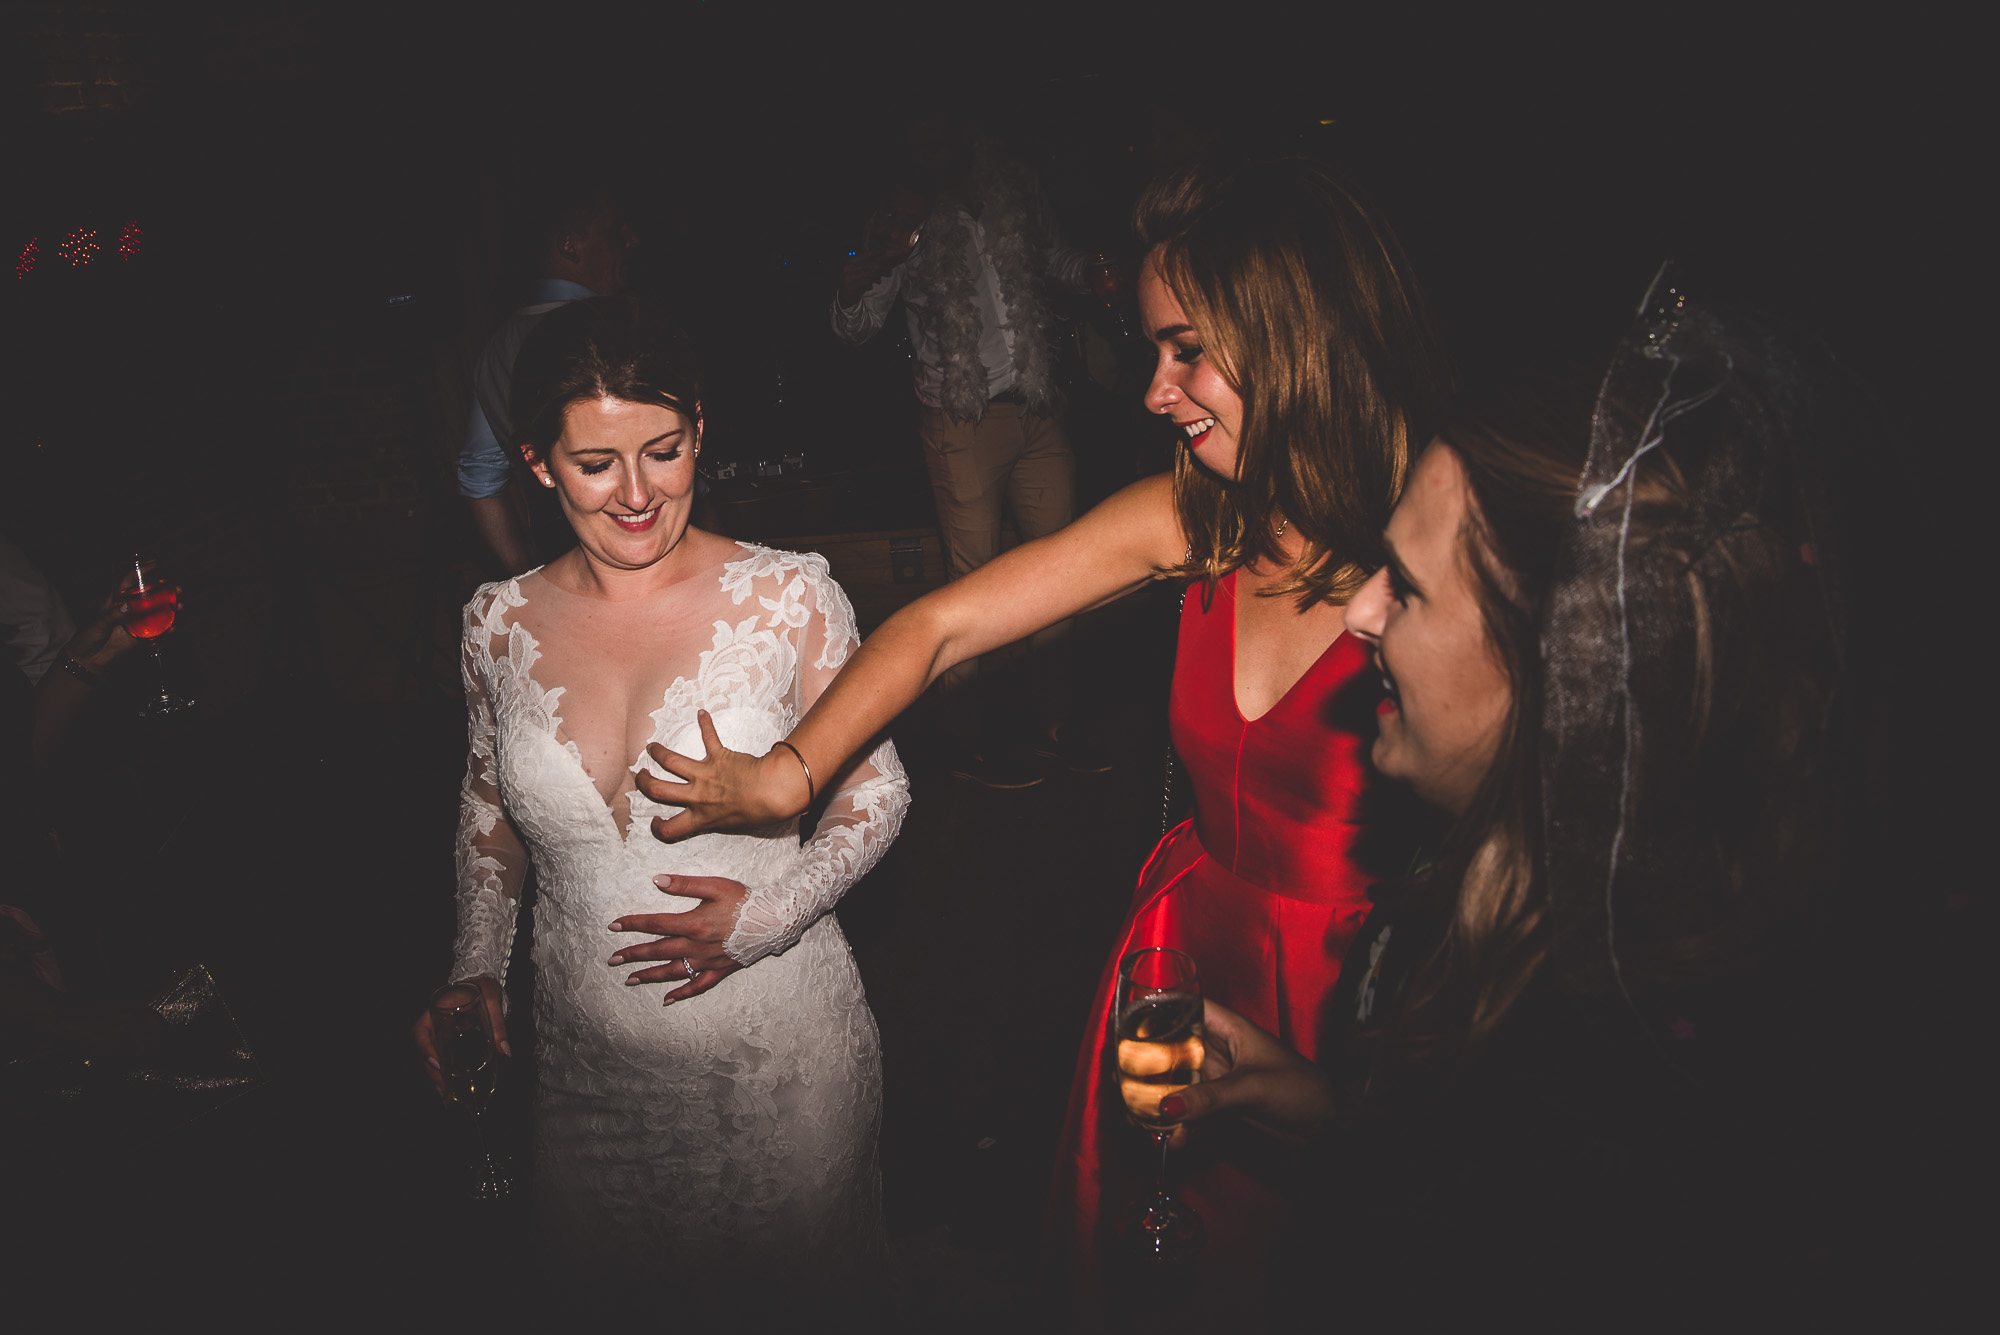 A groom captures a captivating wedding photo of two brides dancing at the reception.